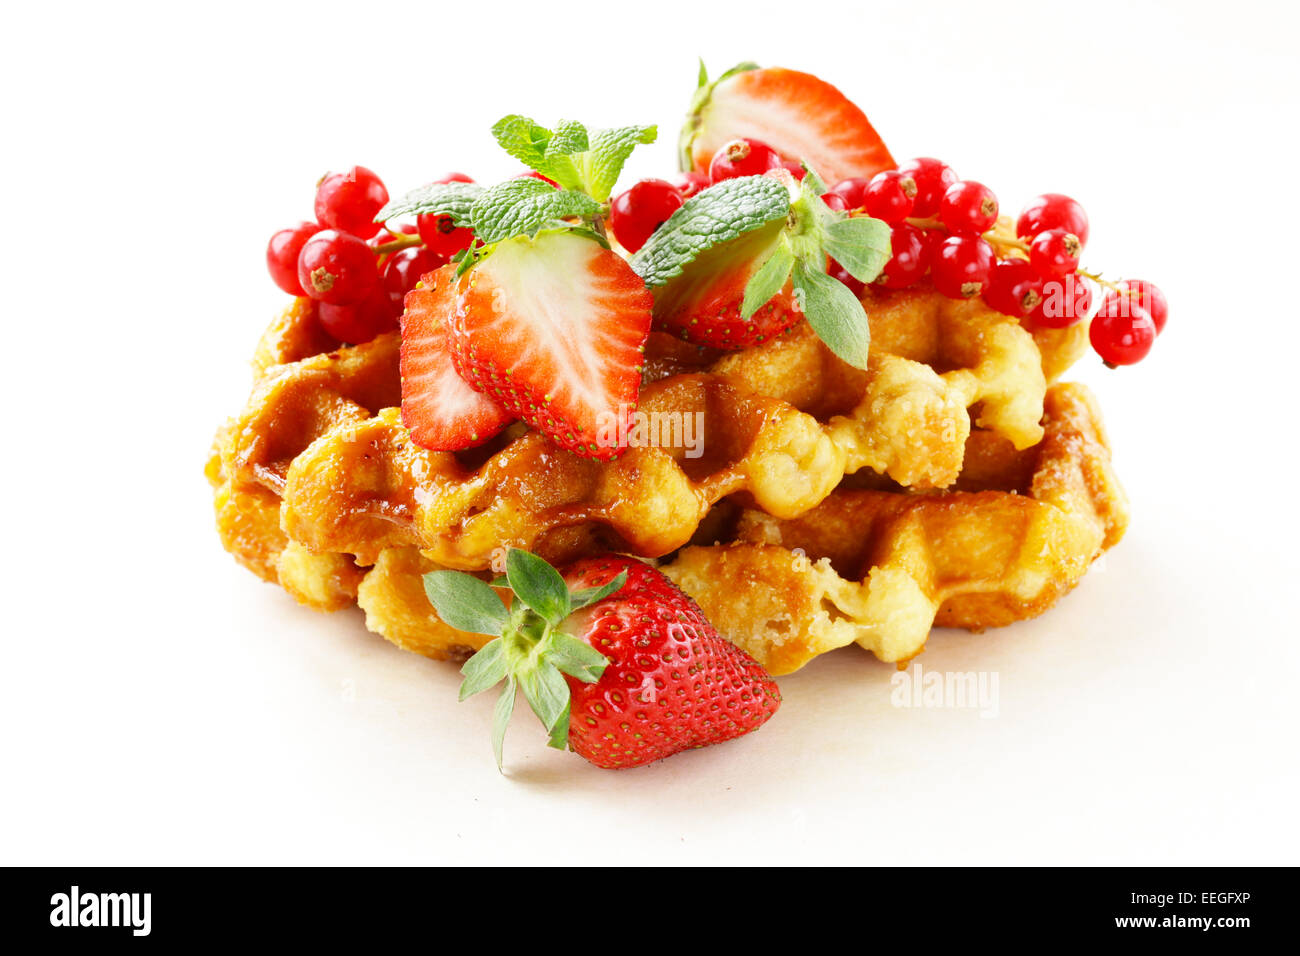 homemade Belgian waffles with berries (currants and strawberries) Stock Photo